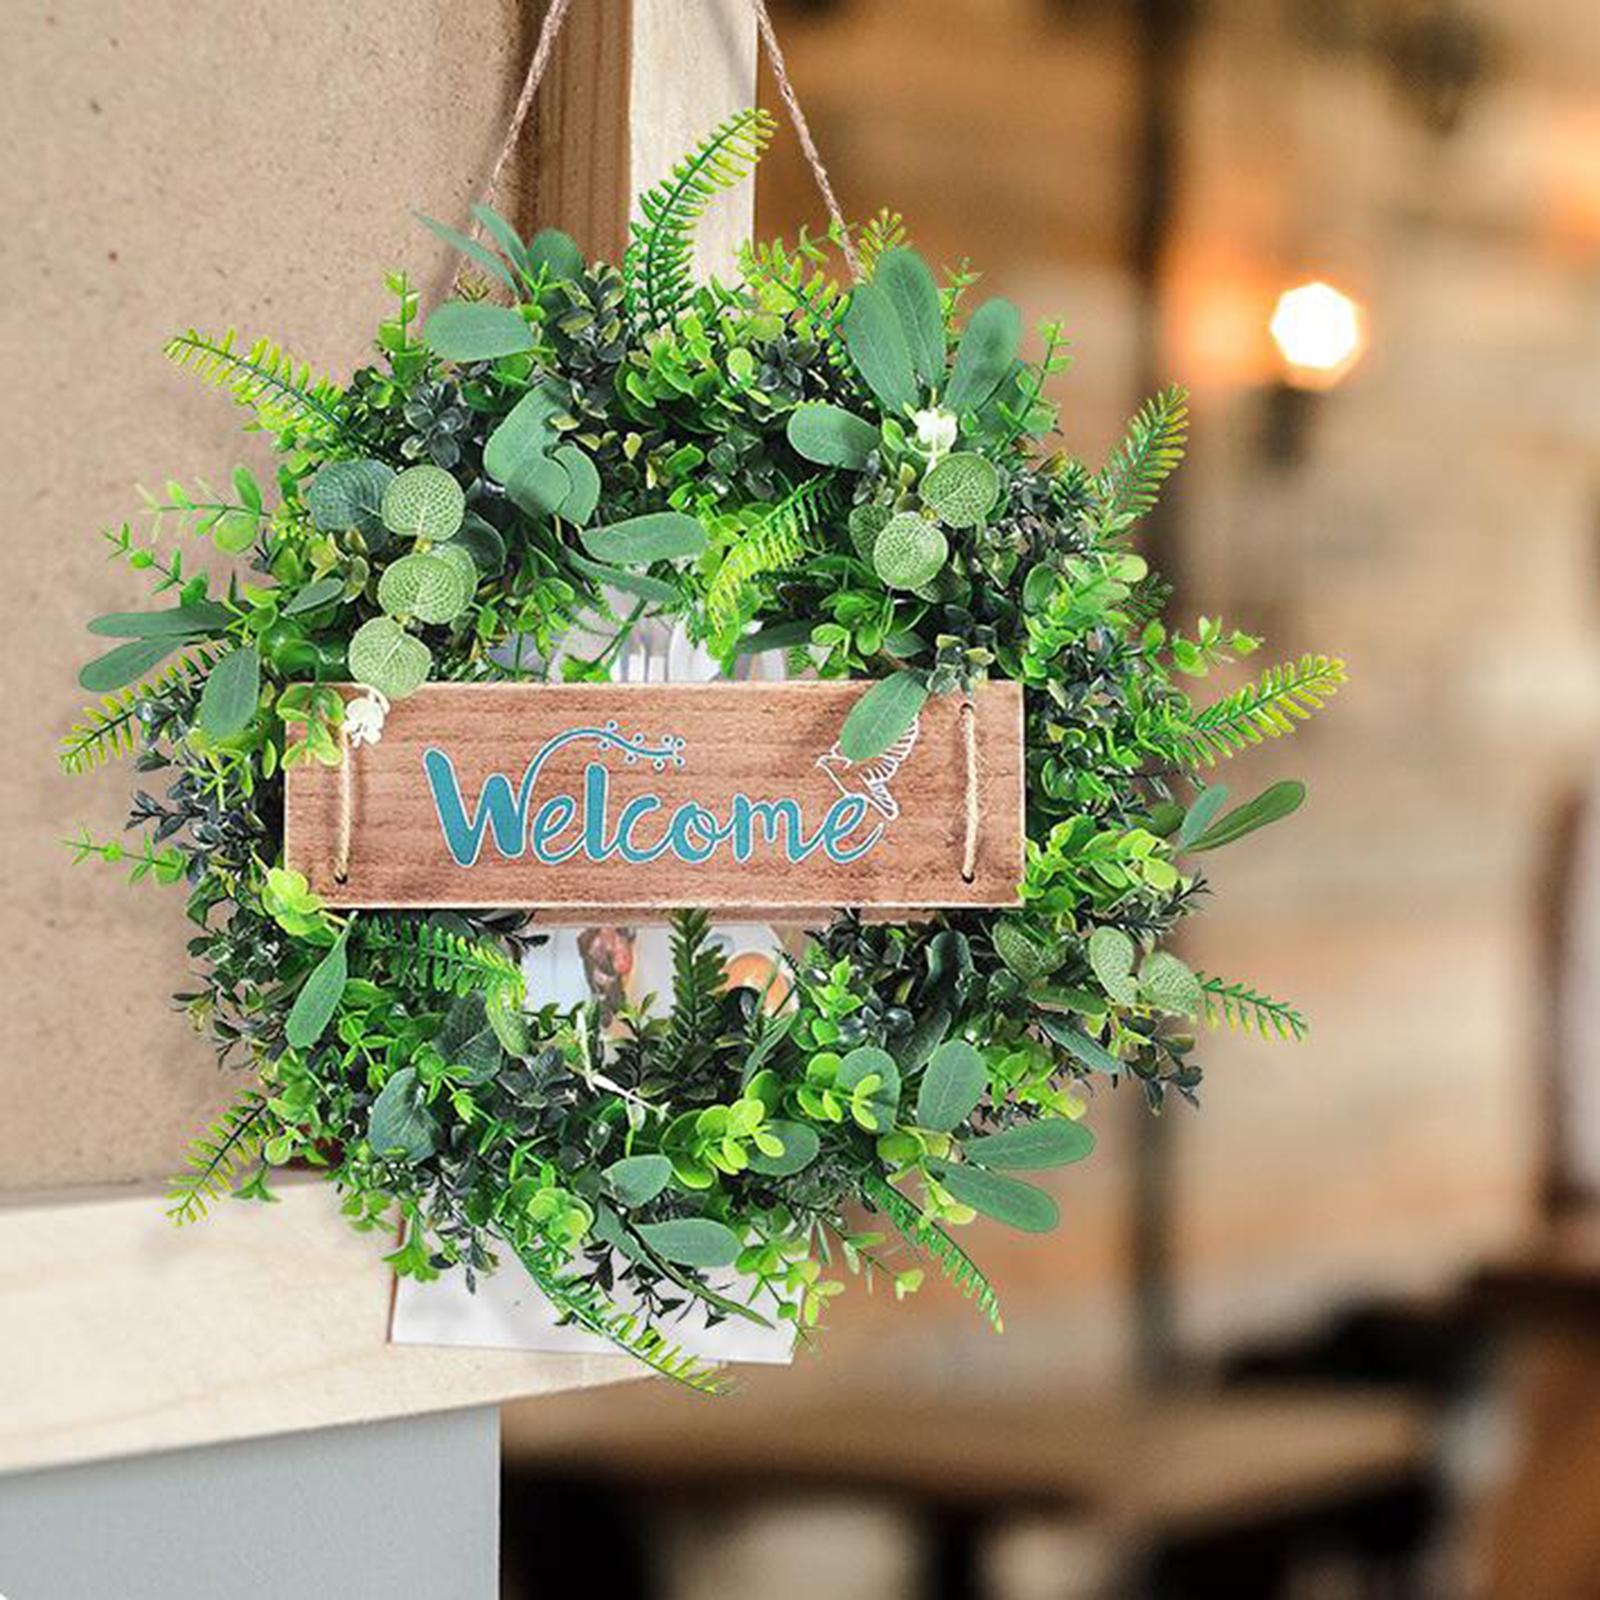 Artificial Green Leaves Wreath Spring Summer Wreath Door Wreaths for Holiday